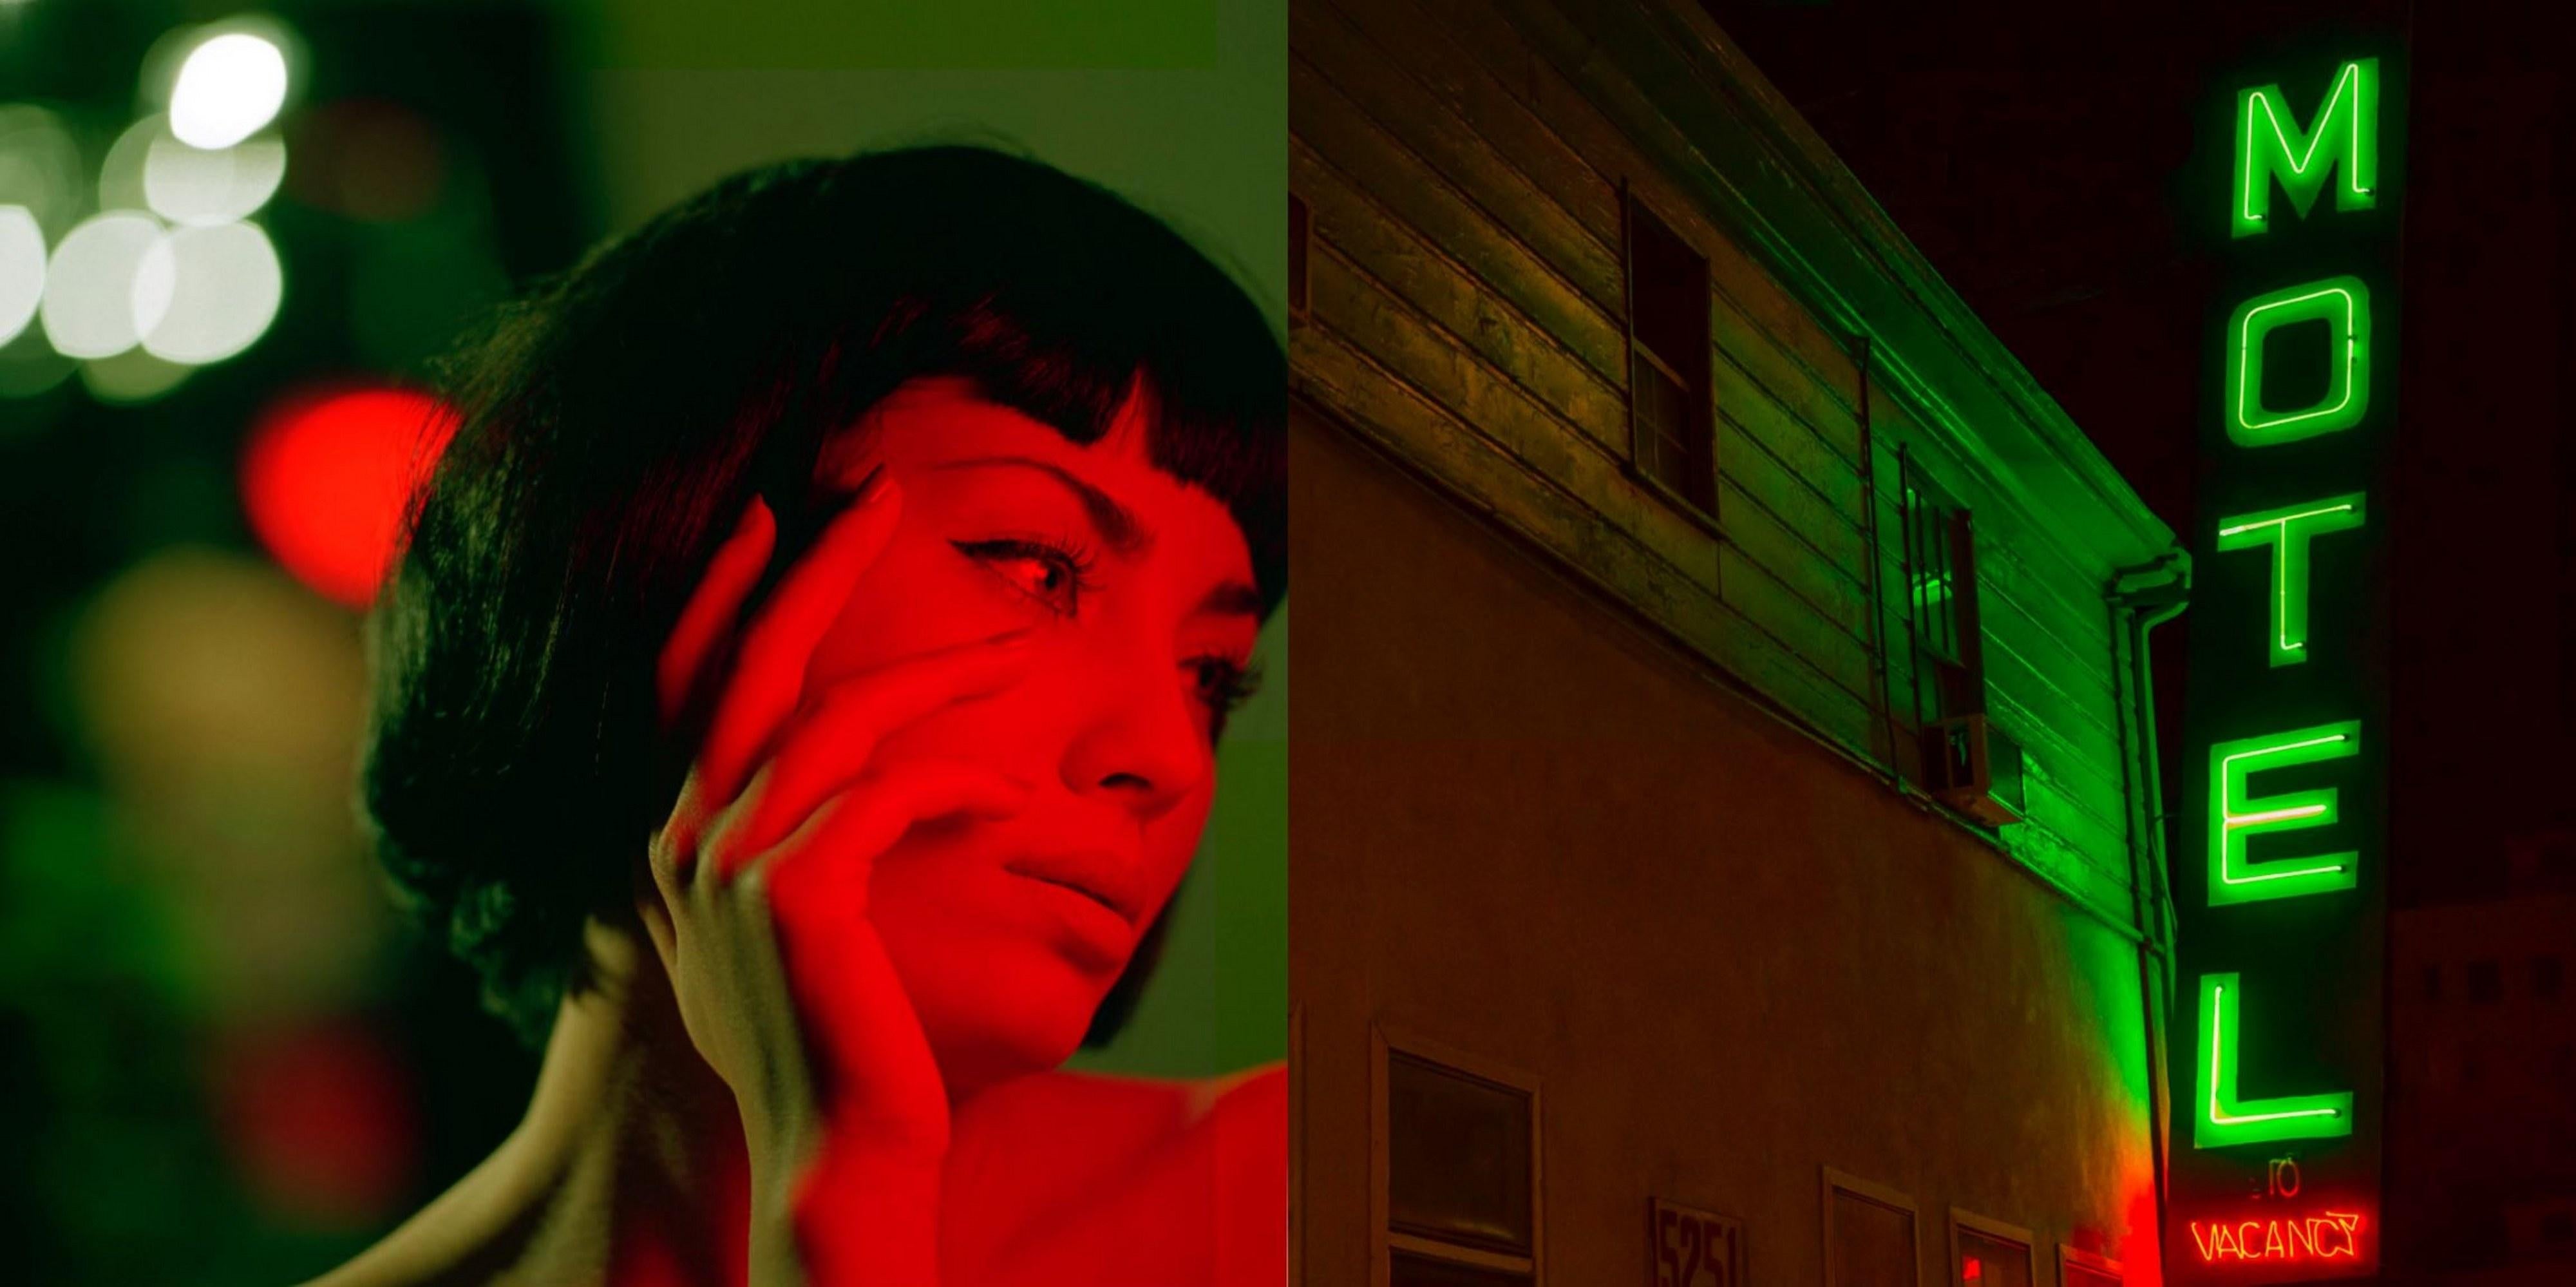 Guido Argentini Portrait Photograph - Diptych: Sleepless nights - portrait model with black hair and motel neon sign